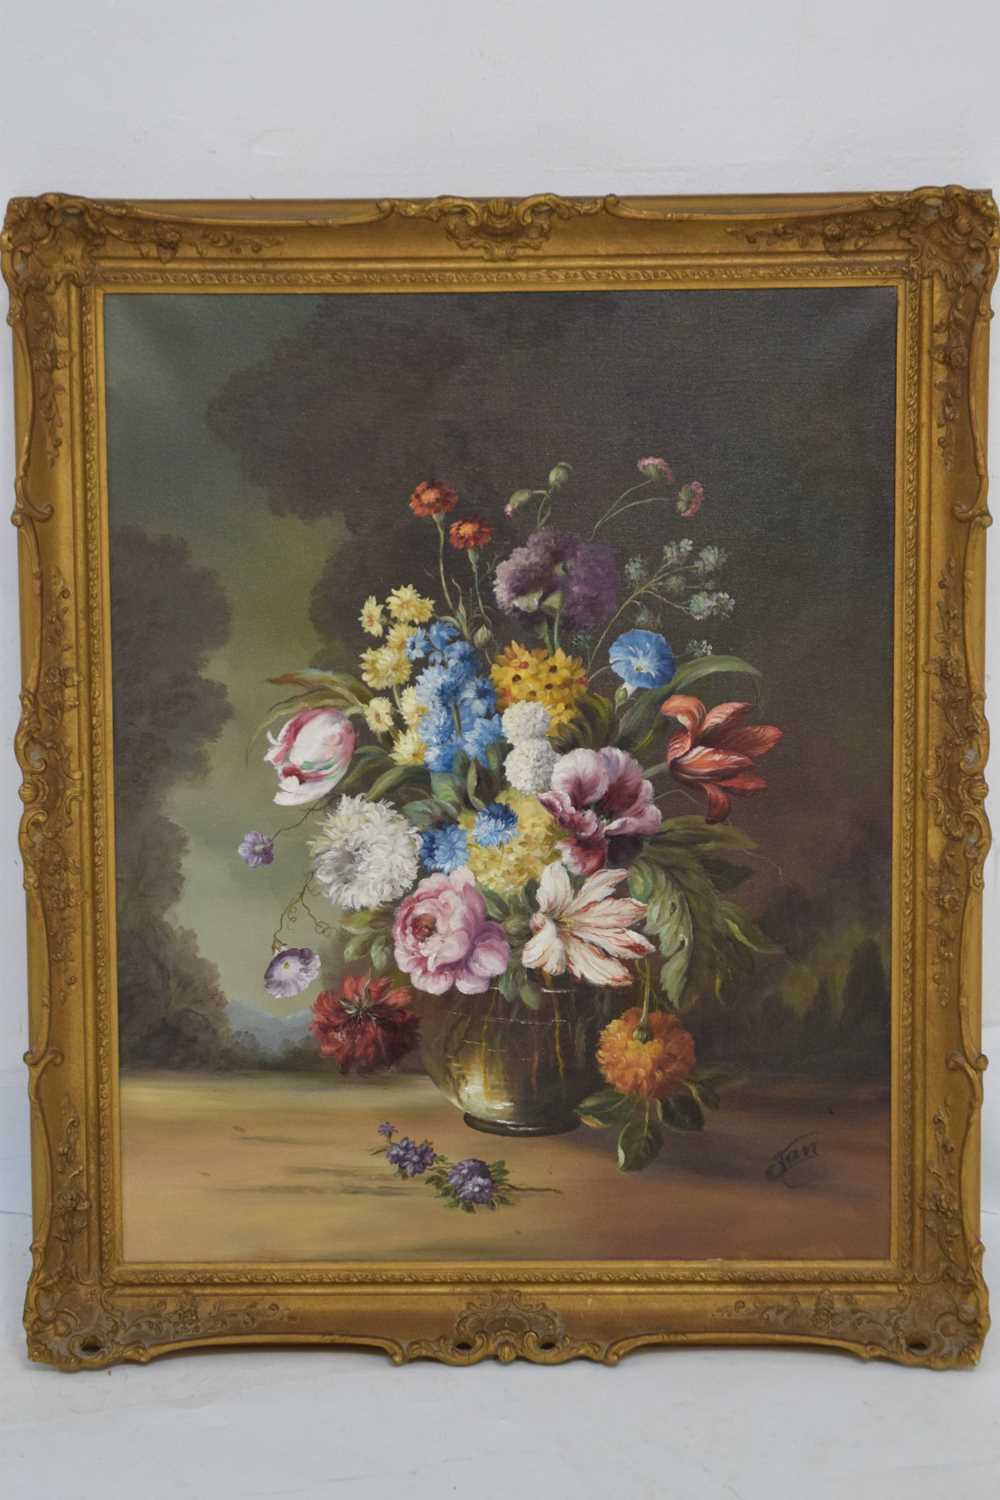 20th century oil on canvas - Still life with flowers - Image 2 of 9